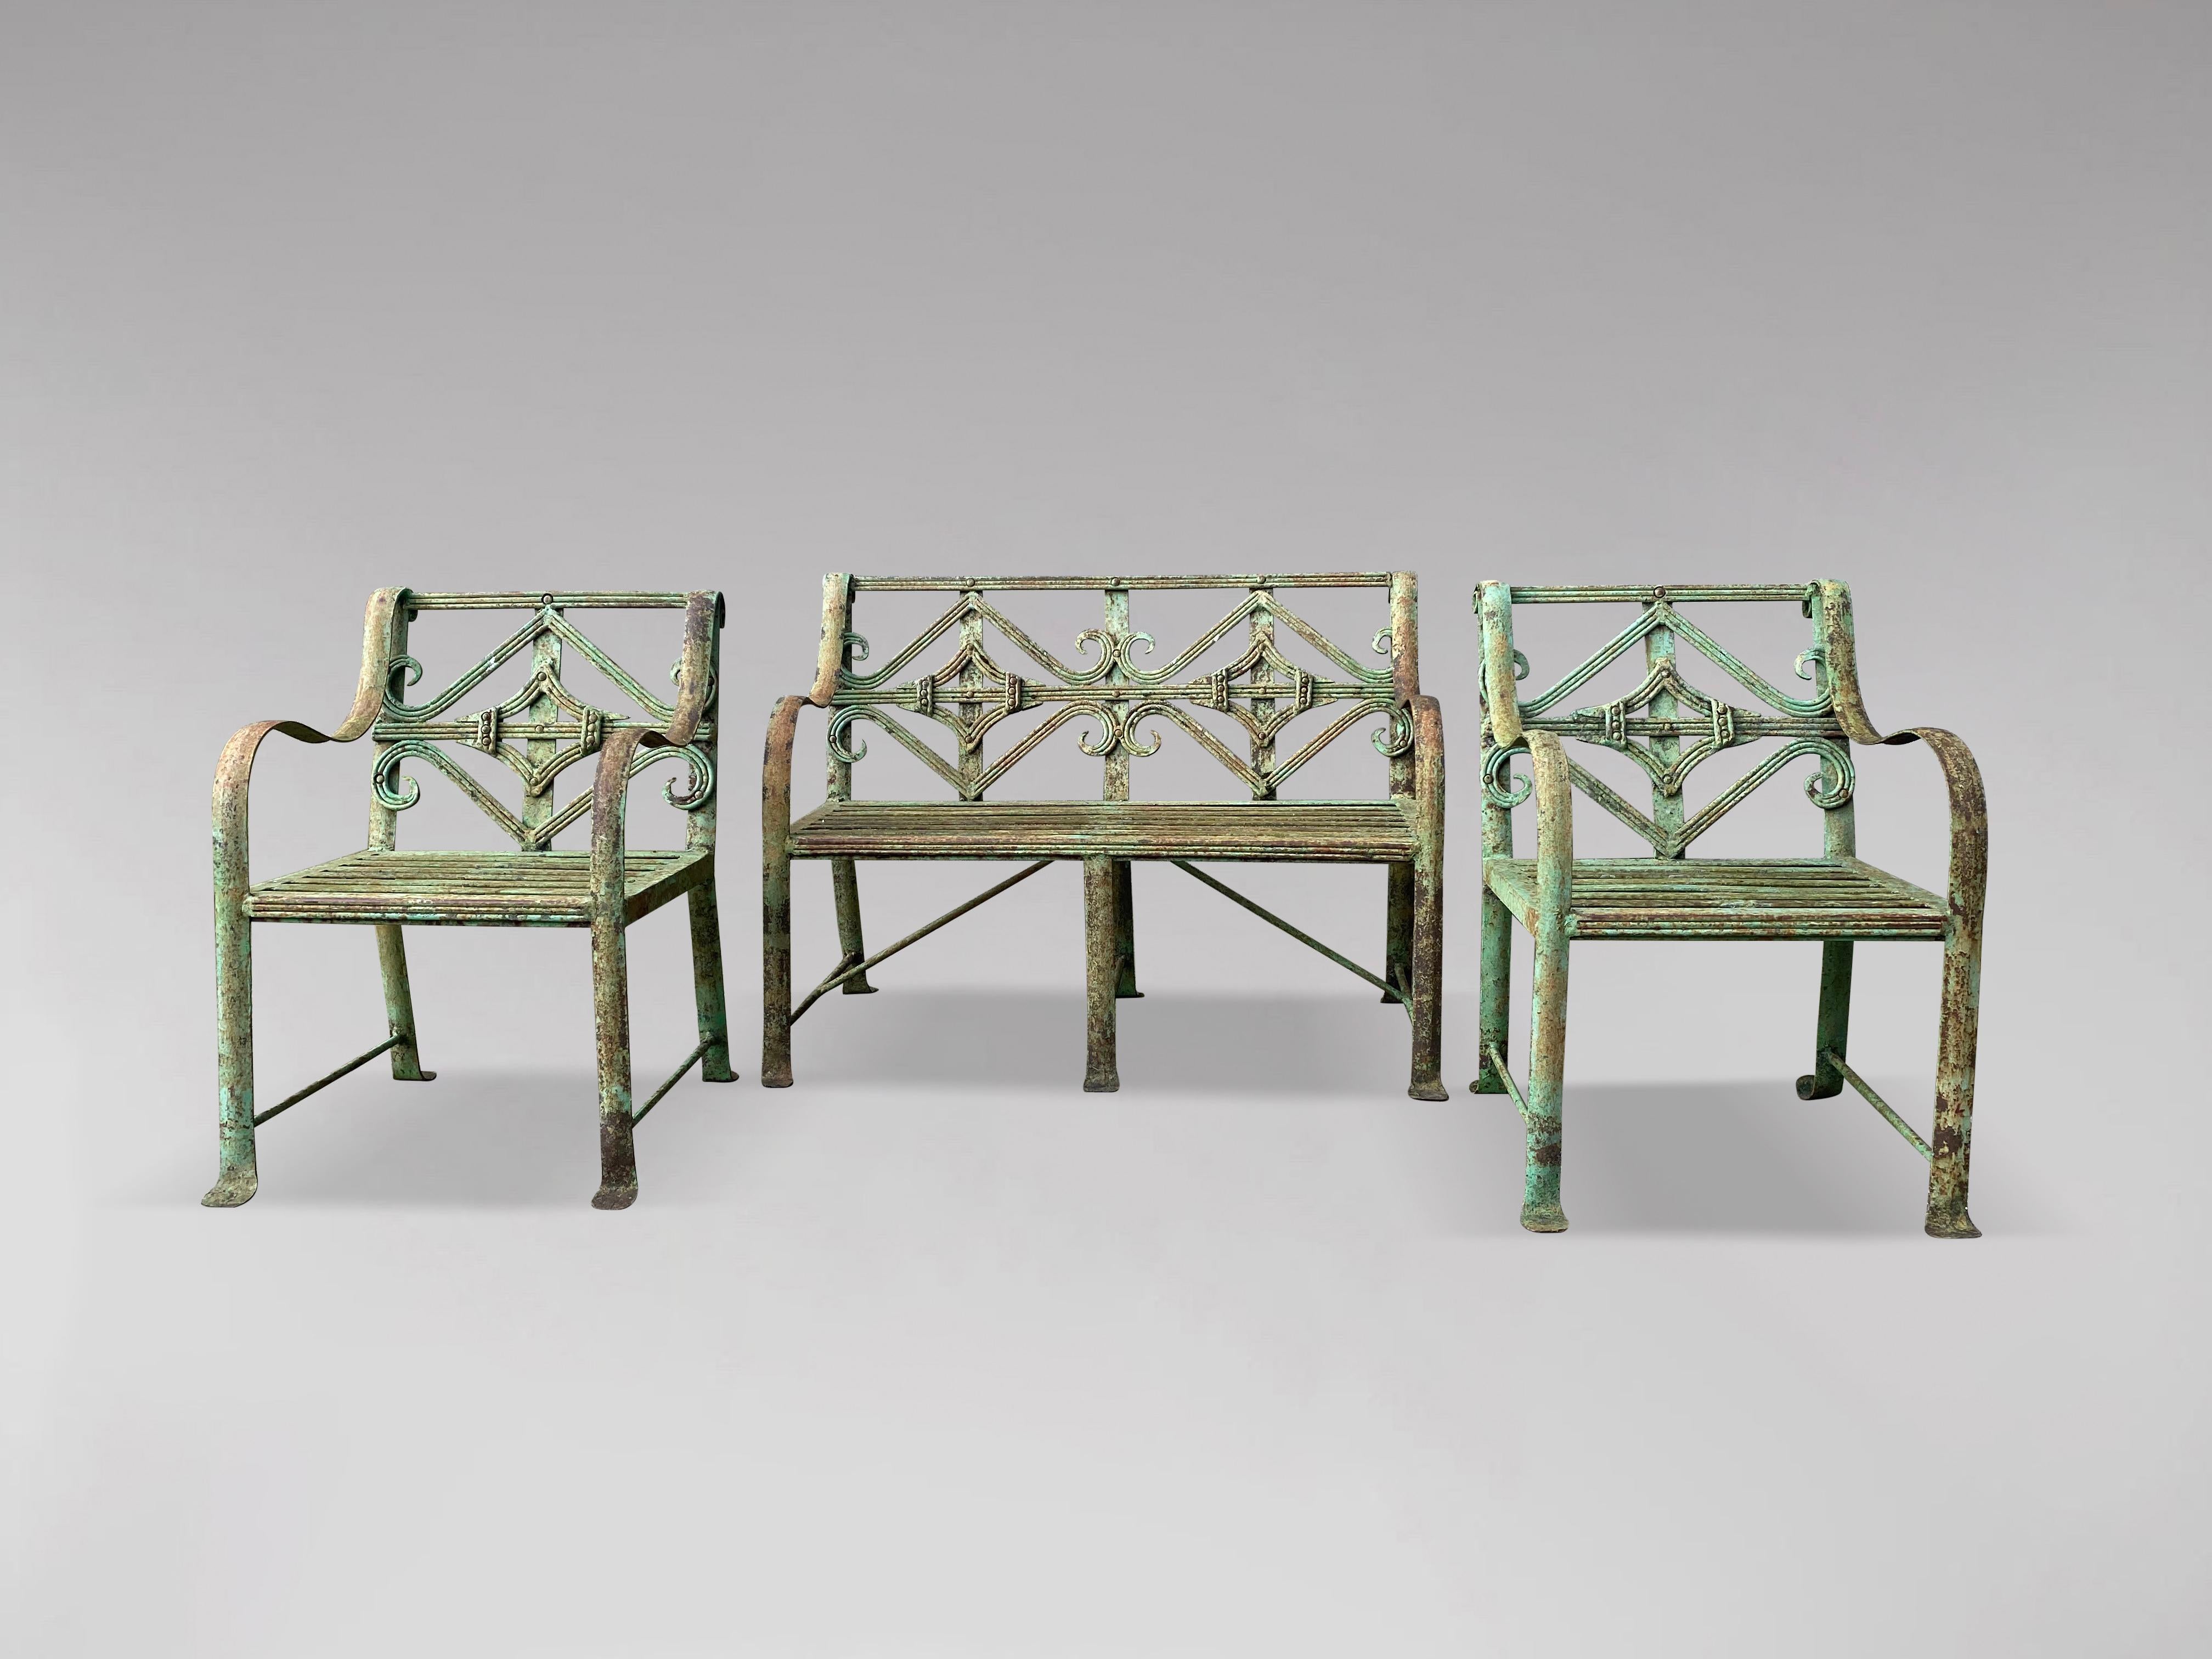 A stunning 19th century green painted wrought iron child's garden suite. Comprising a bench (77cm wide) and a pair of matching open armchairs (39cm wide). Great quality.

The dimensions are:
Height: 56cm (22.0in)
Width: 77cm (30.3in)
Depth: 41cm